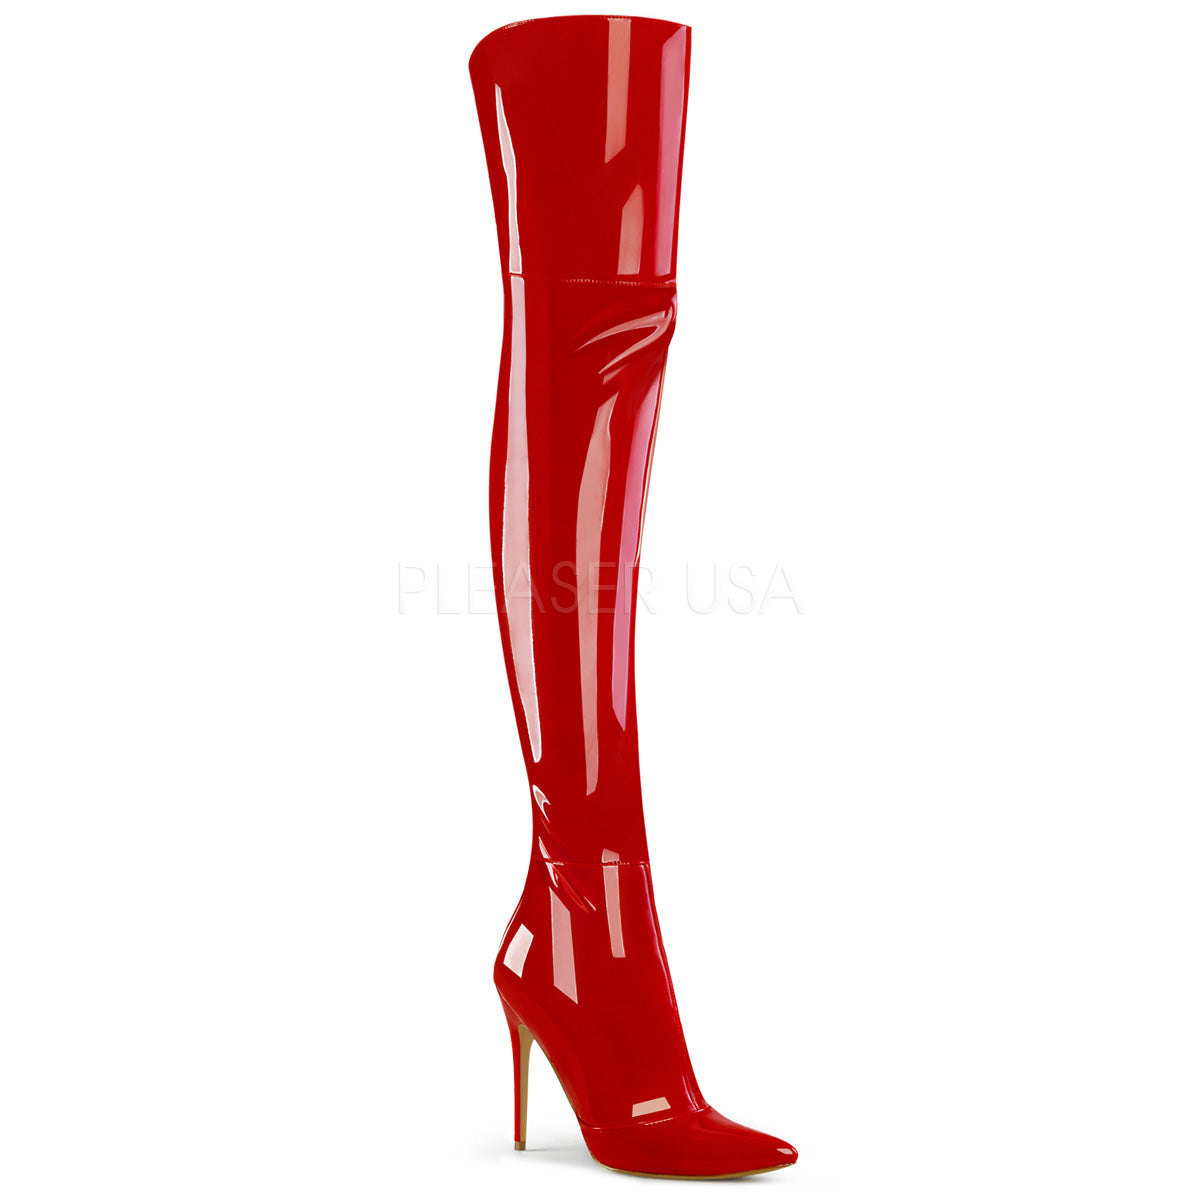 5" Heel COURTLY-3012 Red Pat